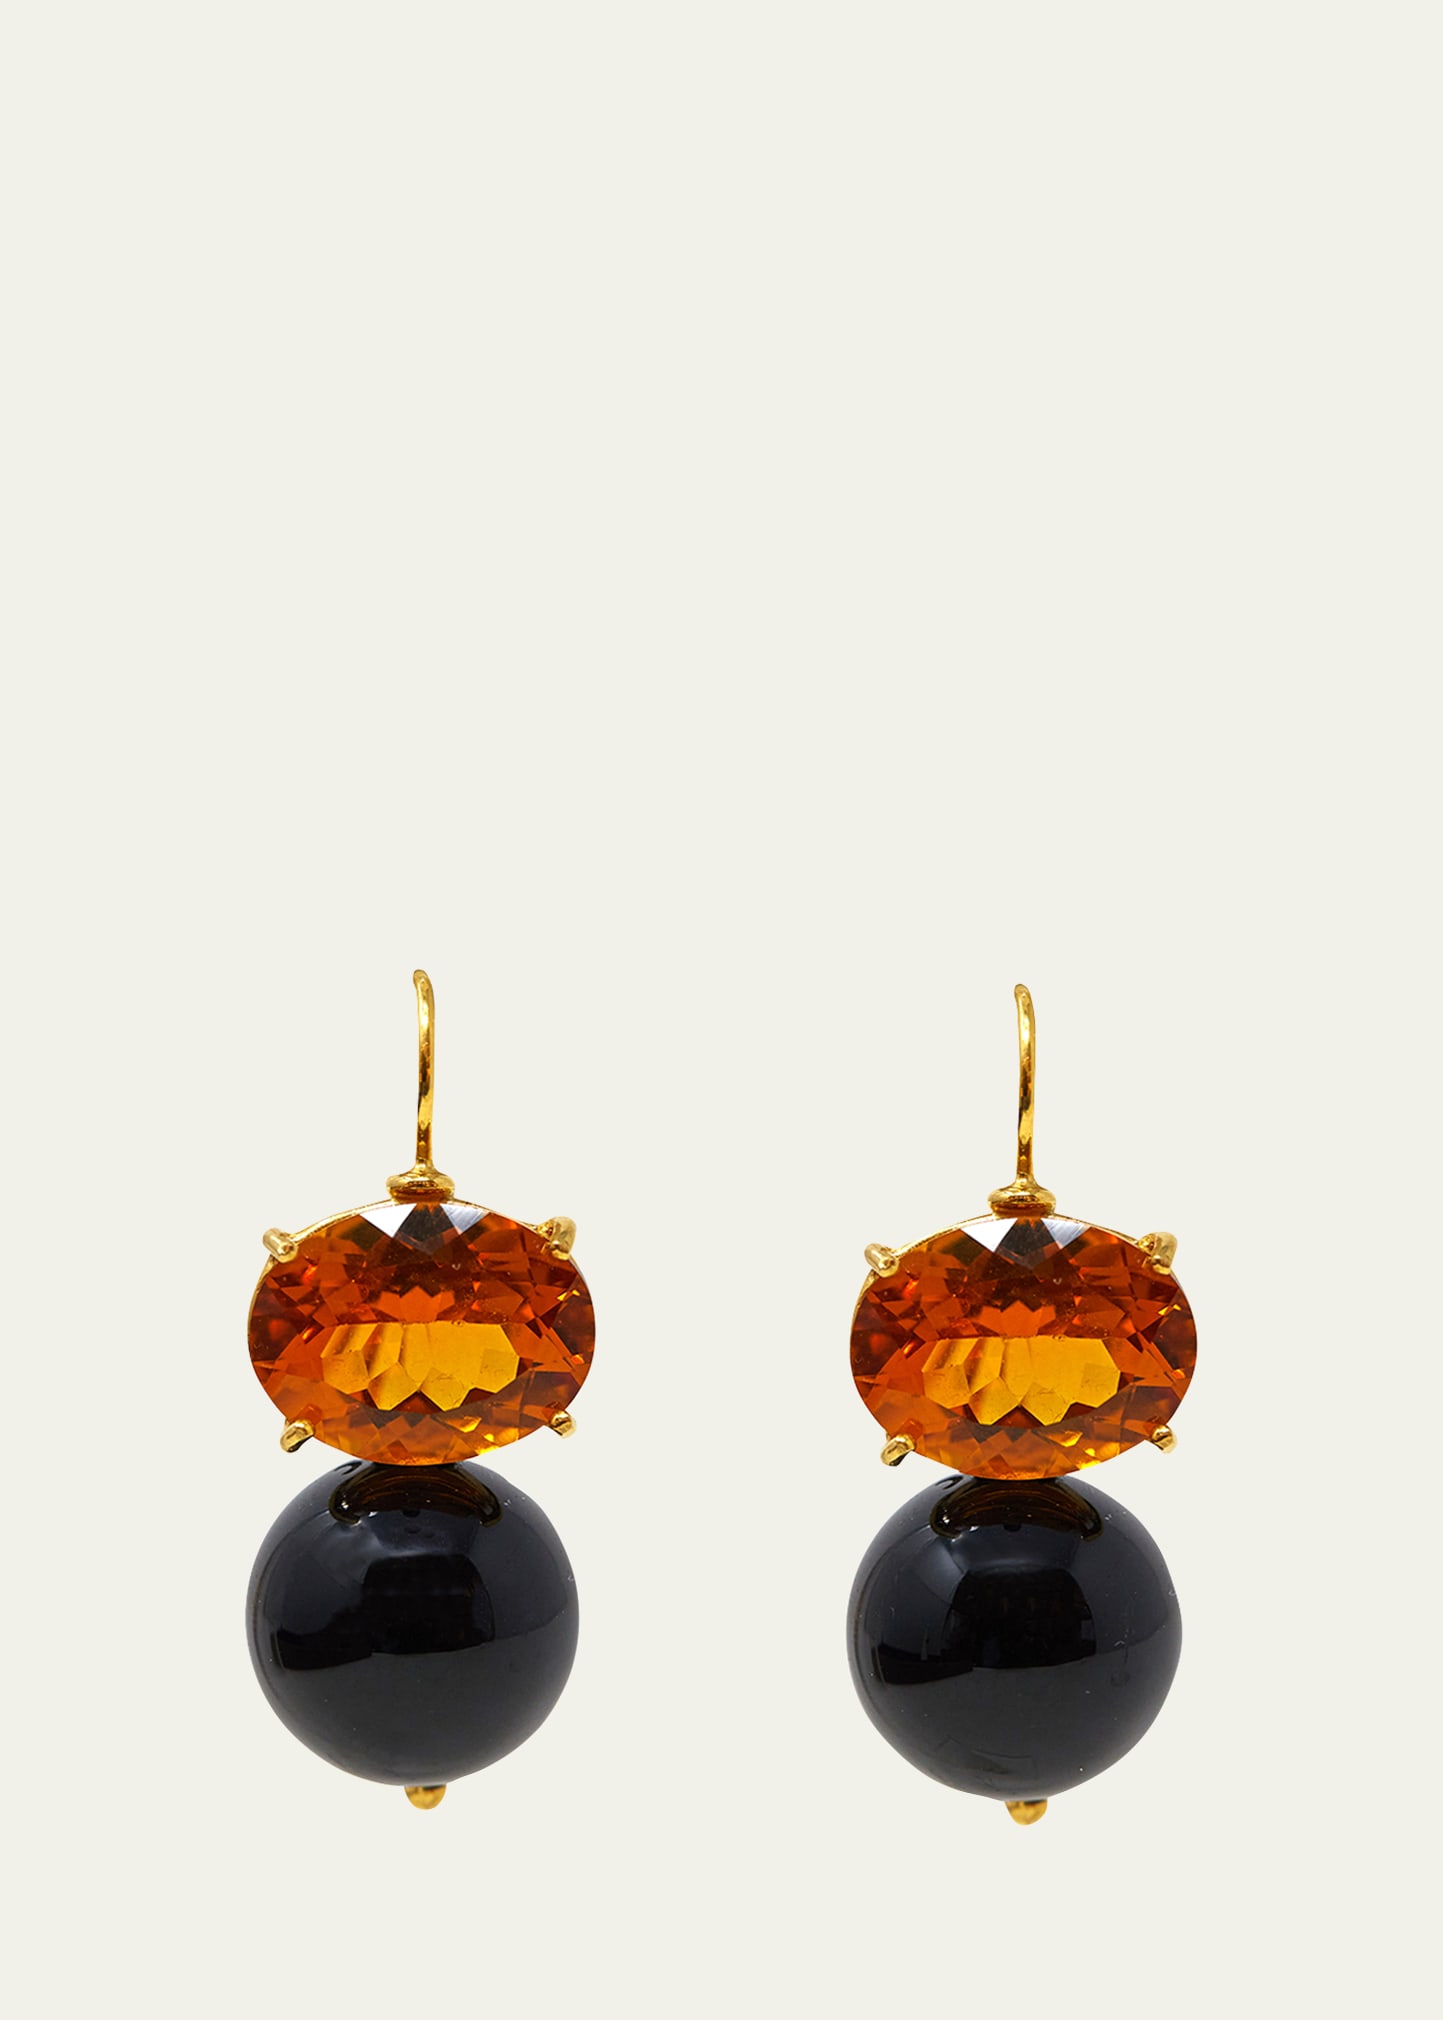 Grazia And Marica Vozza 18K Yellow Gold Hook Earrings with Onyx and Citrine Quartz